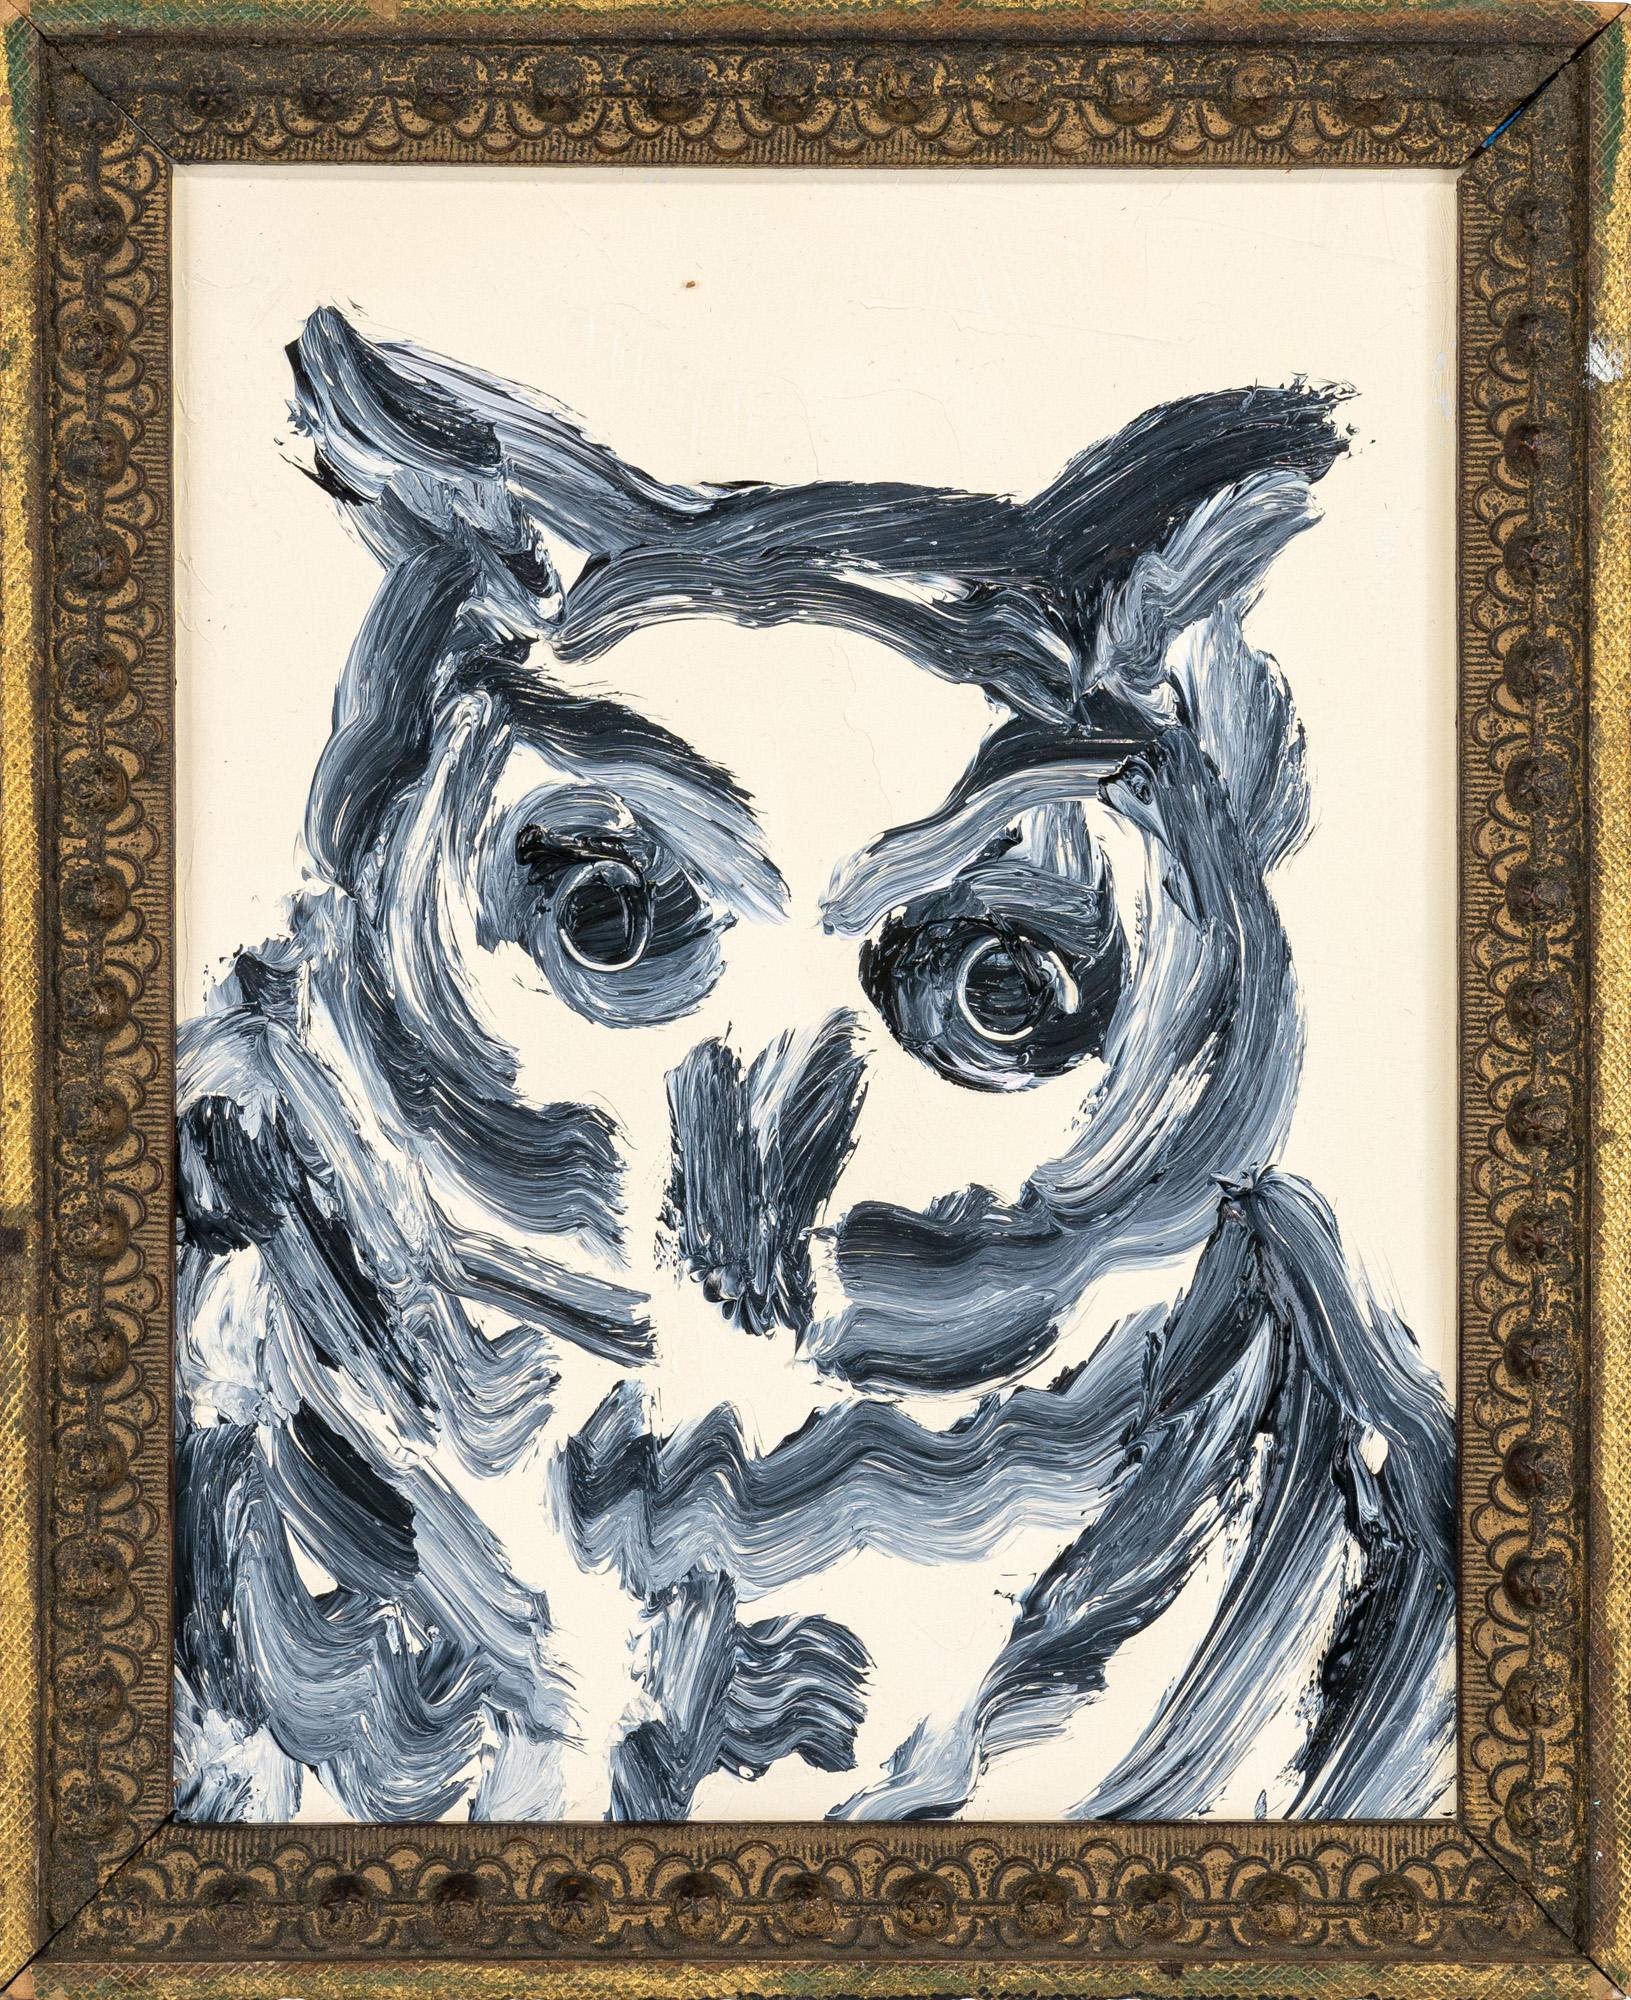 "Hoot" is a framed oil painting on wood by Hunt Slonem, depicting a singular owl in painterly contour lines set against a simple cream colored background. 

This piece is finished in an antique frame, which has been hand-selected by the artist for